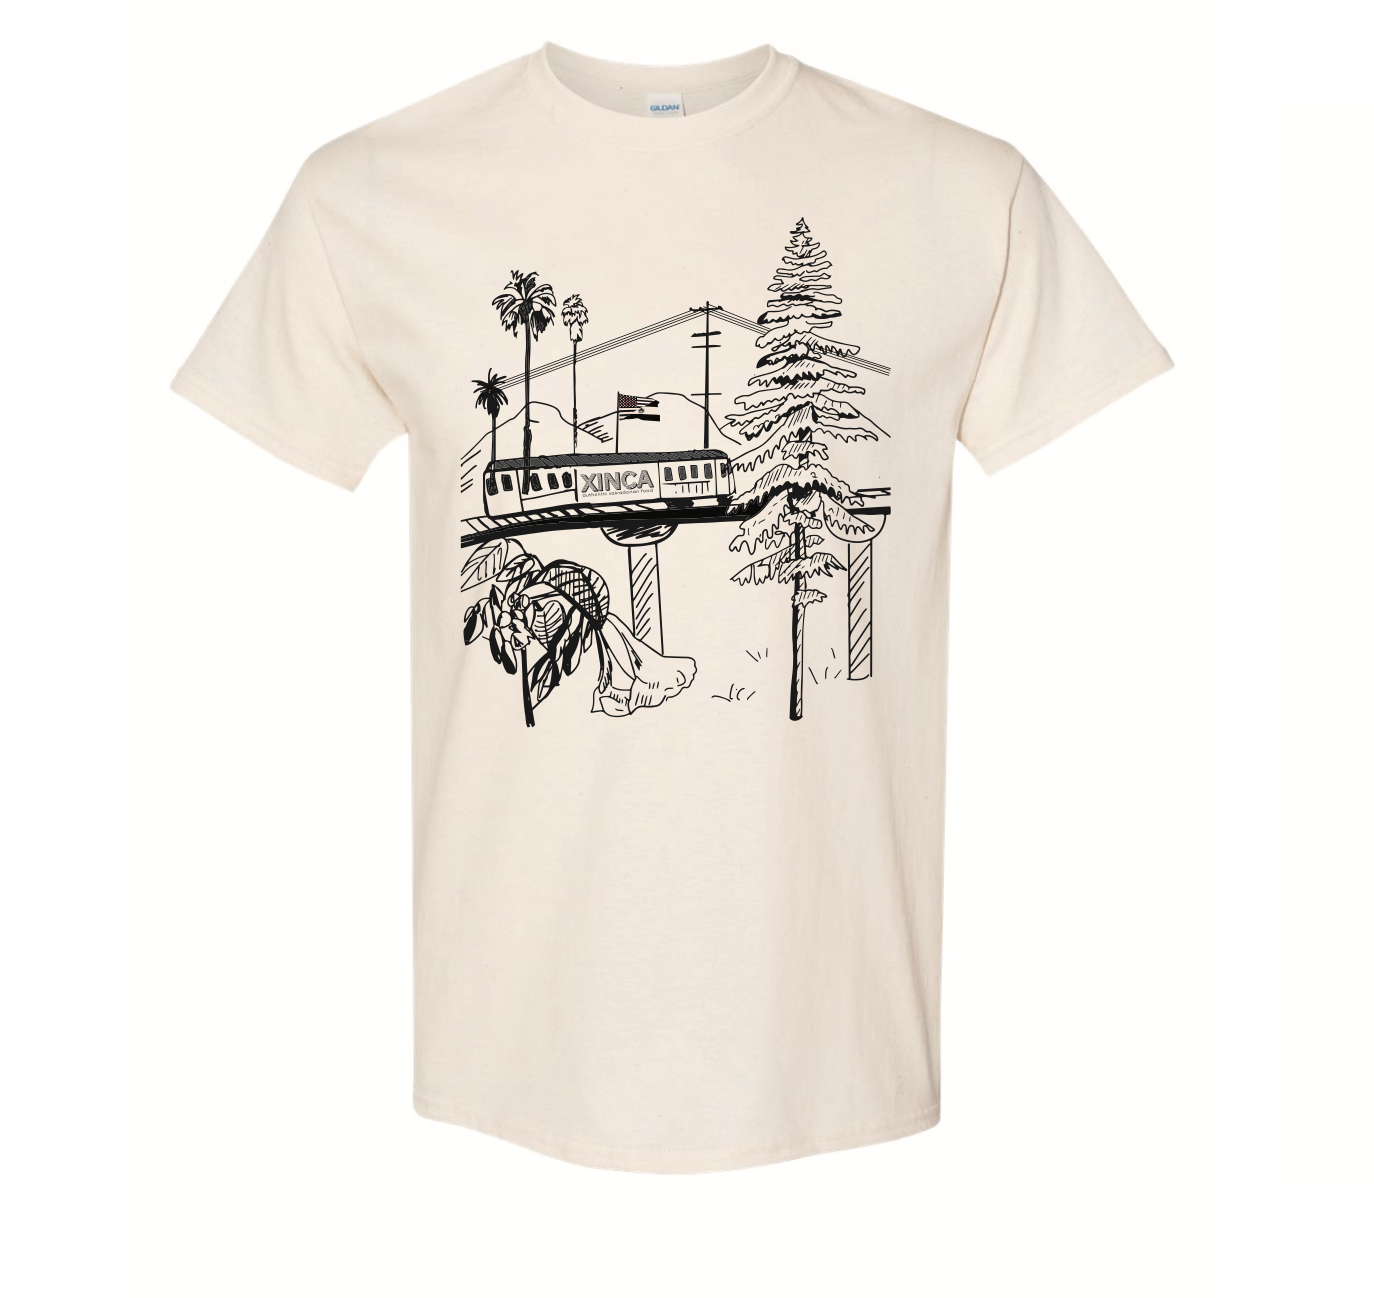 White Shirt with trees, train and Loroco flower. 